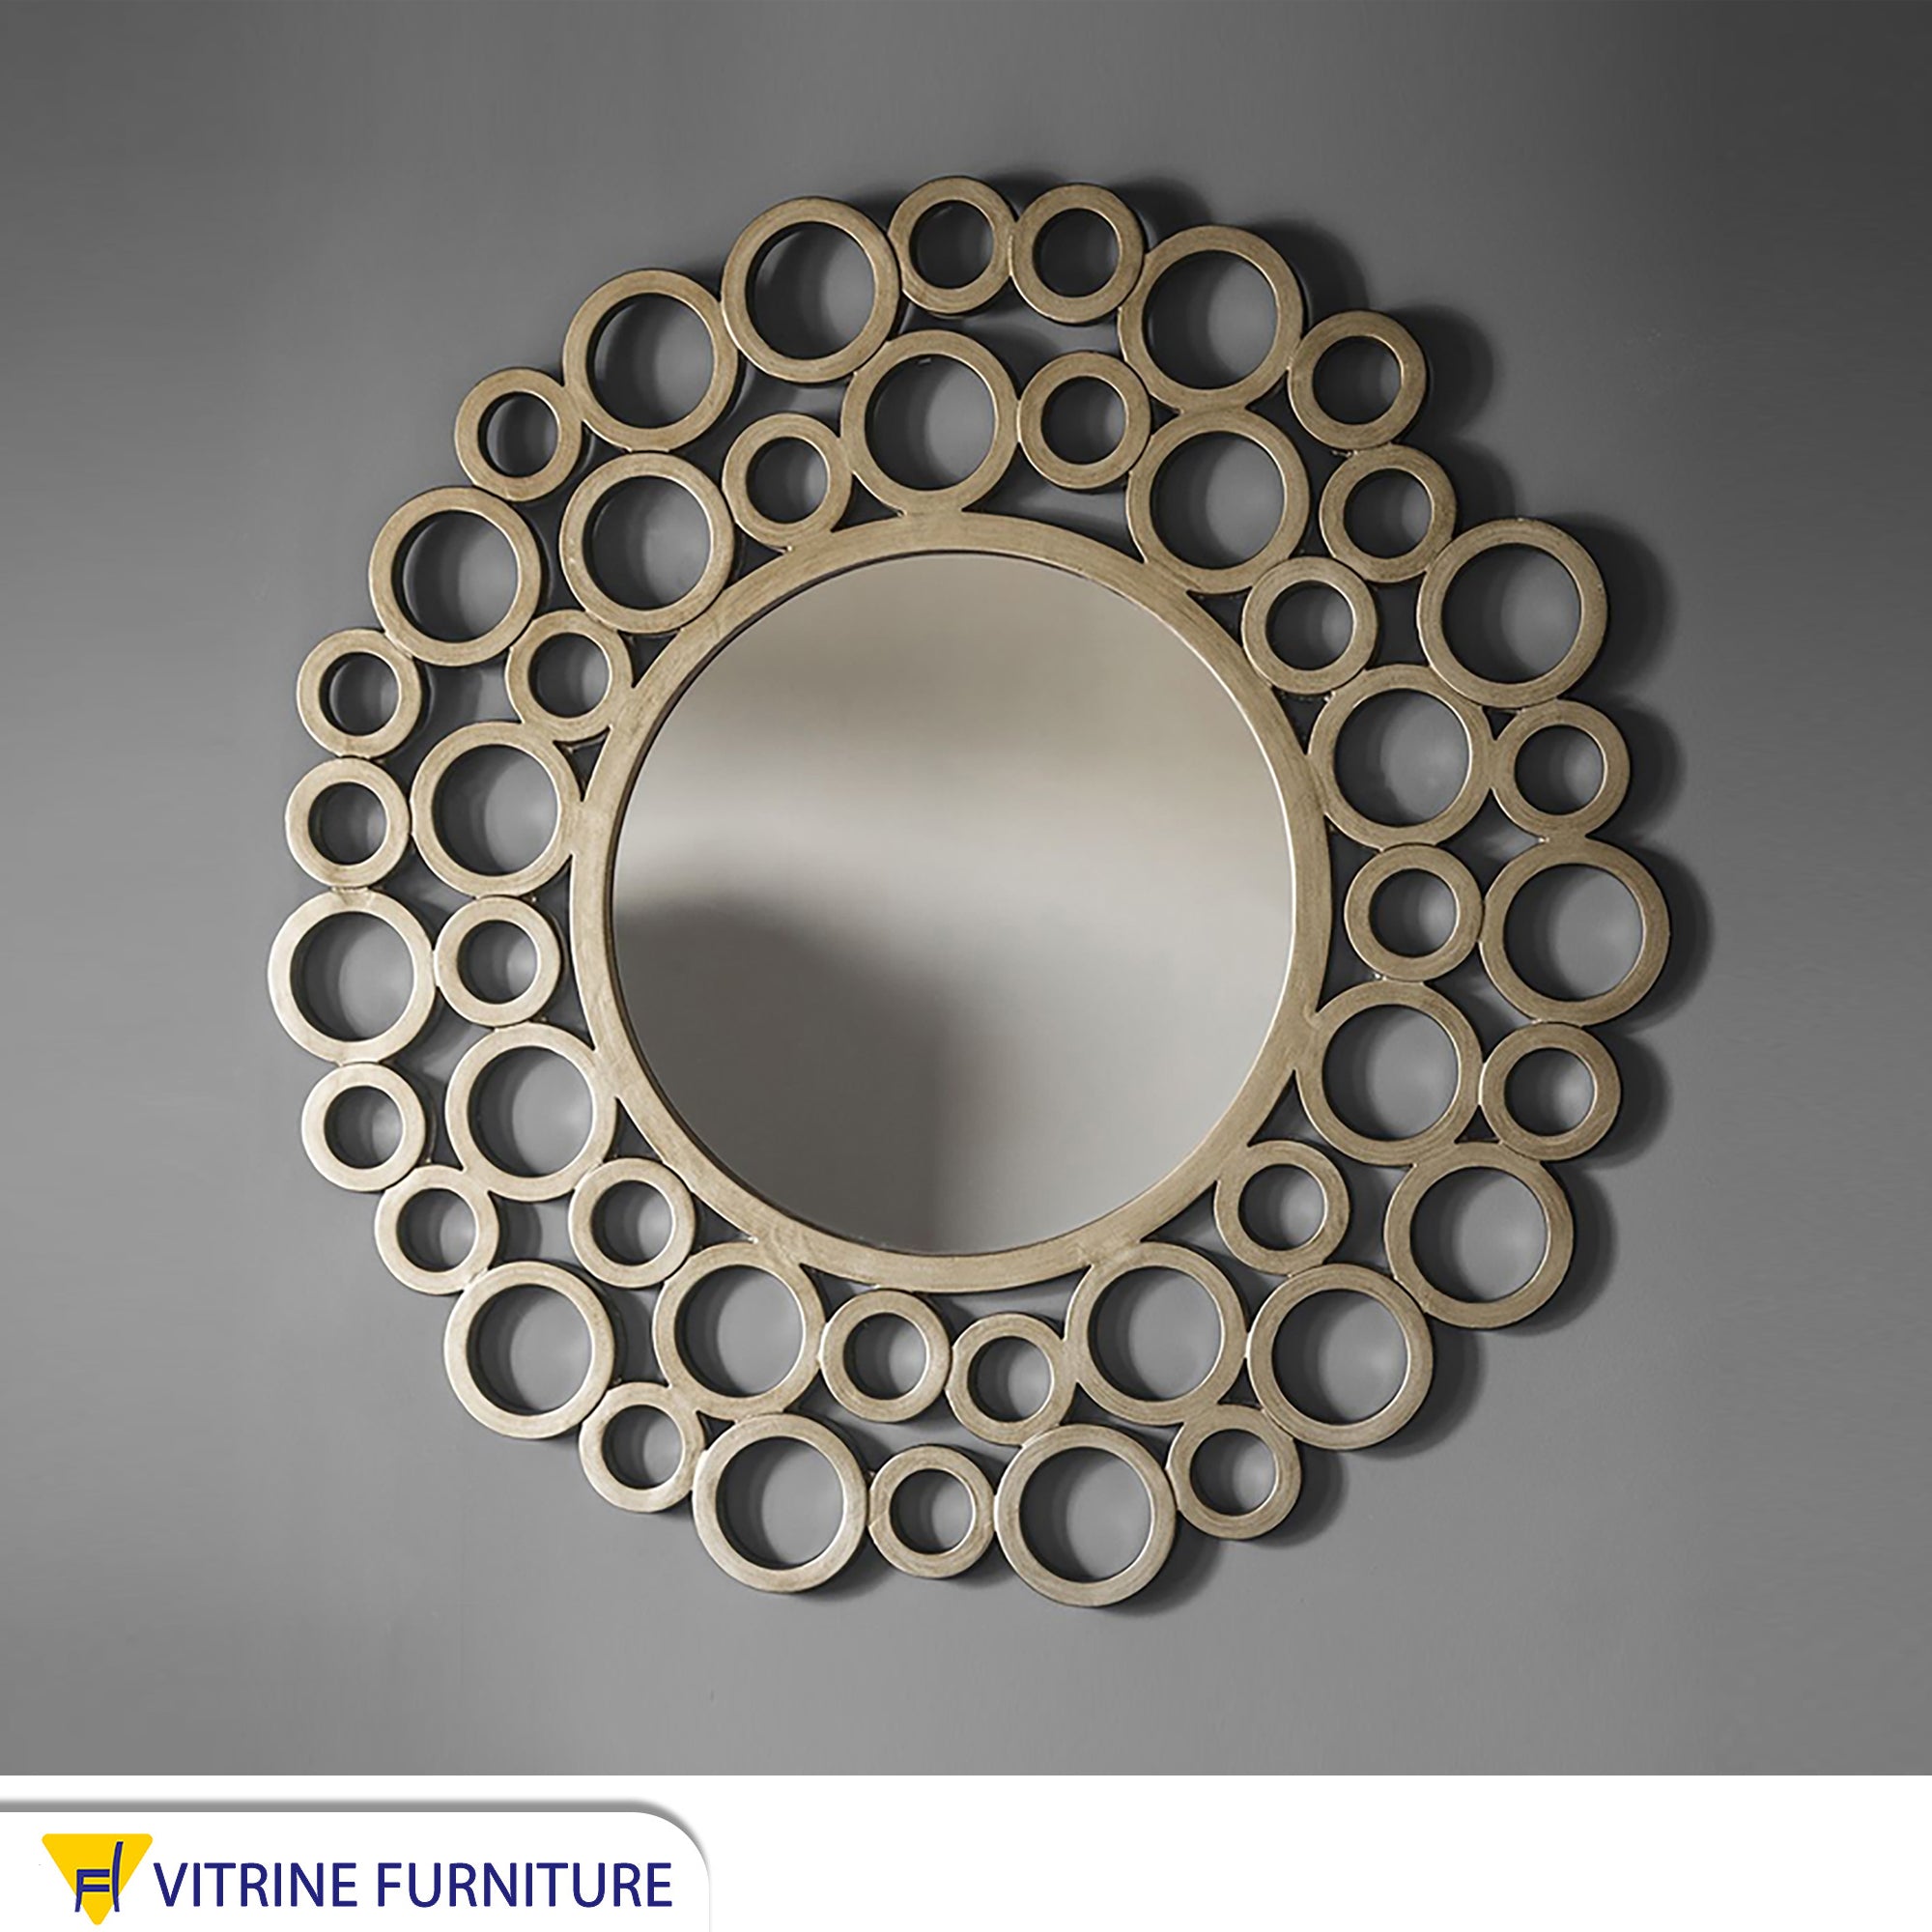 A circular mirror with a frame of multiple wooden circles